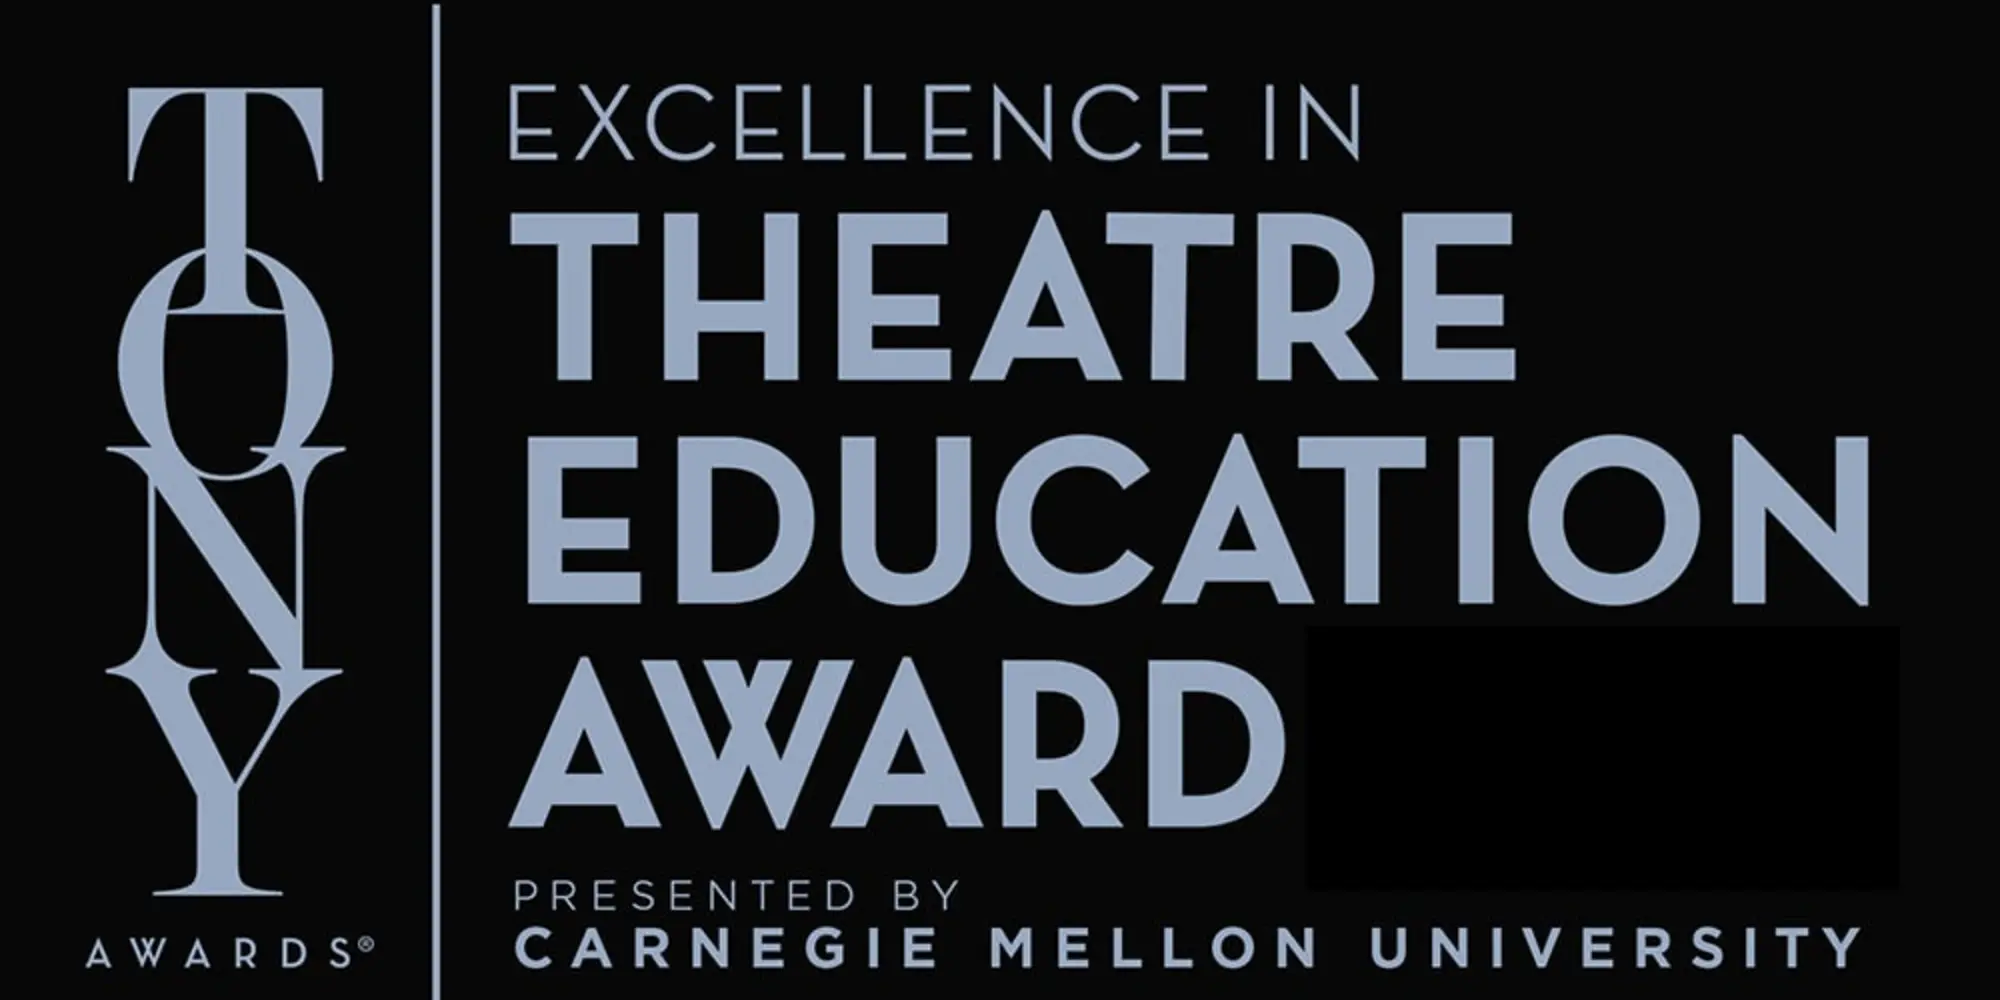 Excellence in Theatre Education Award